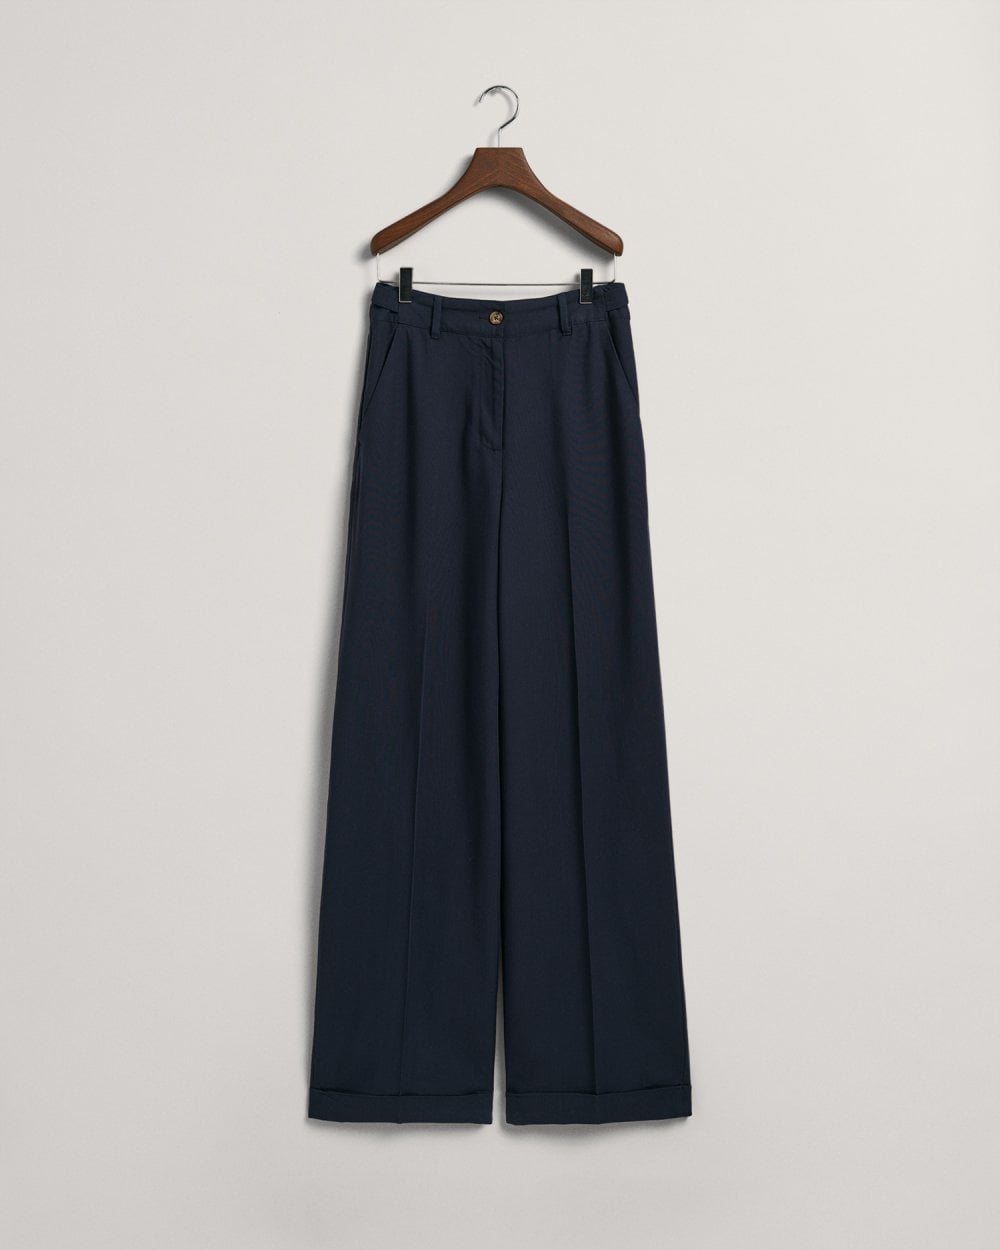 Relaxed Fit Fluid Pants